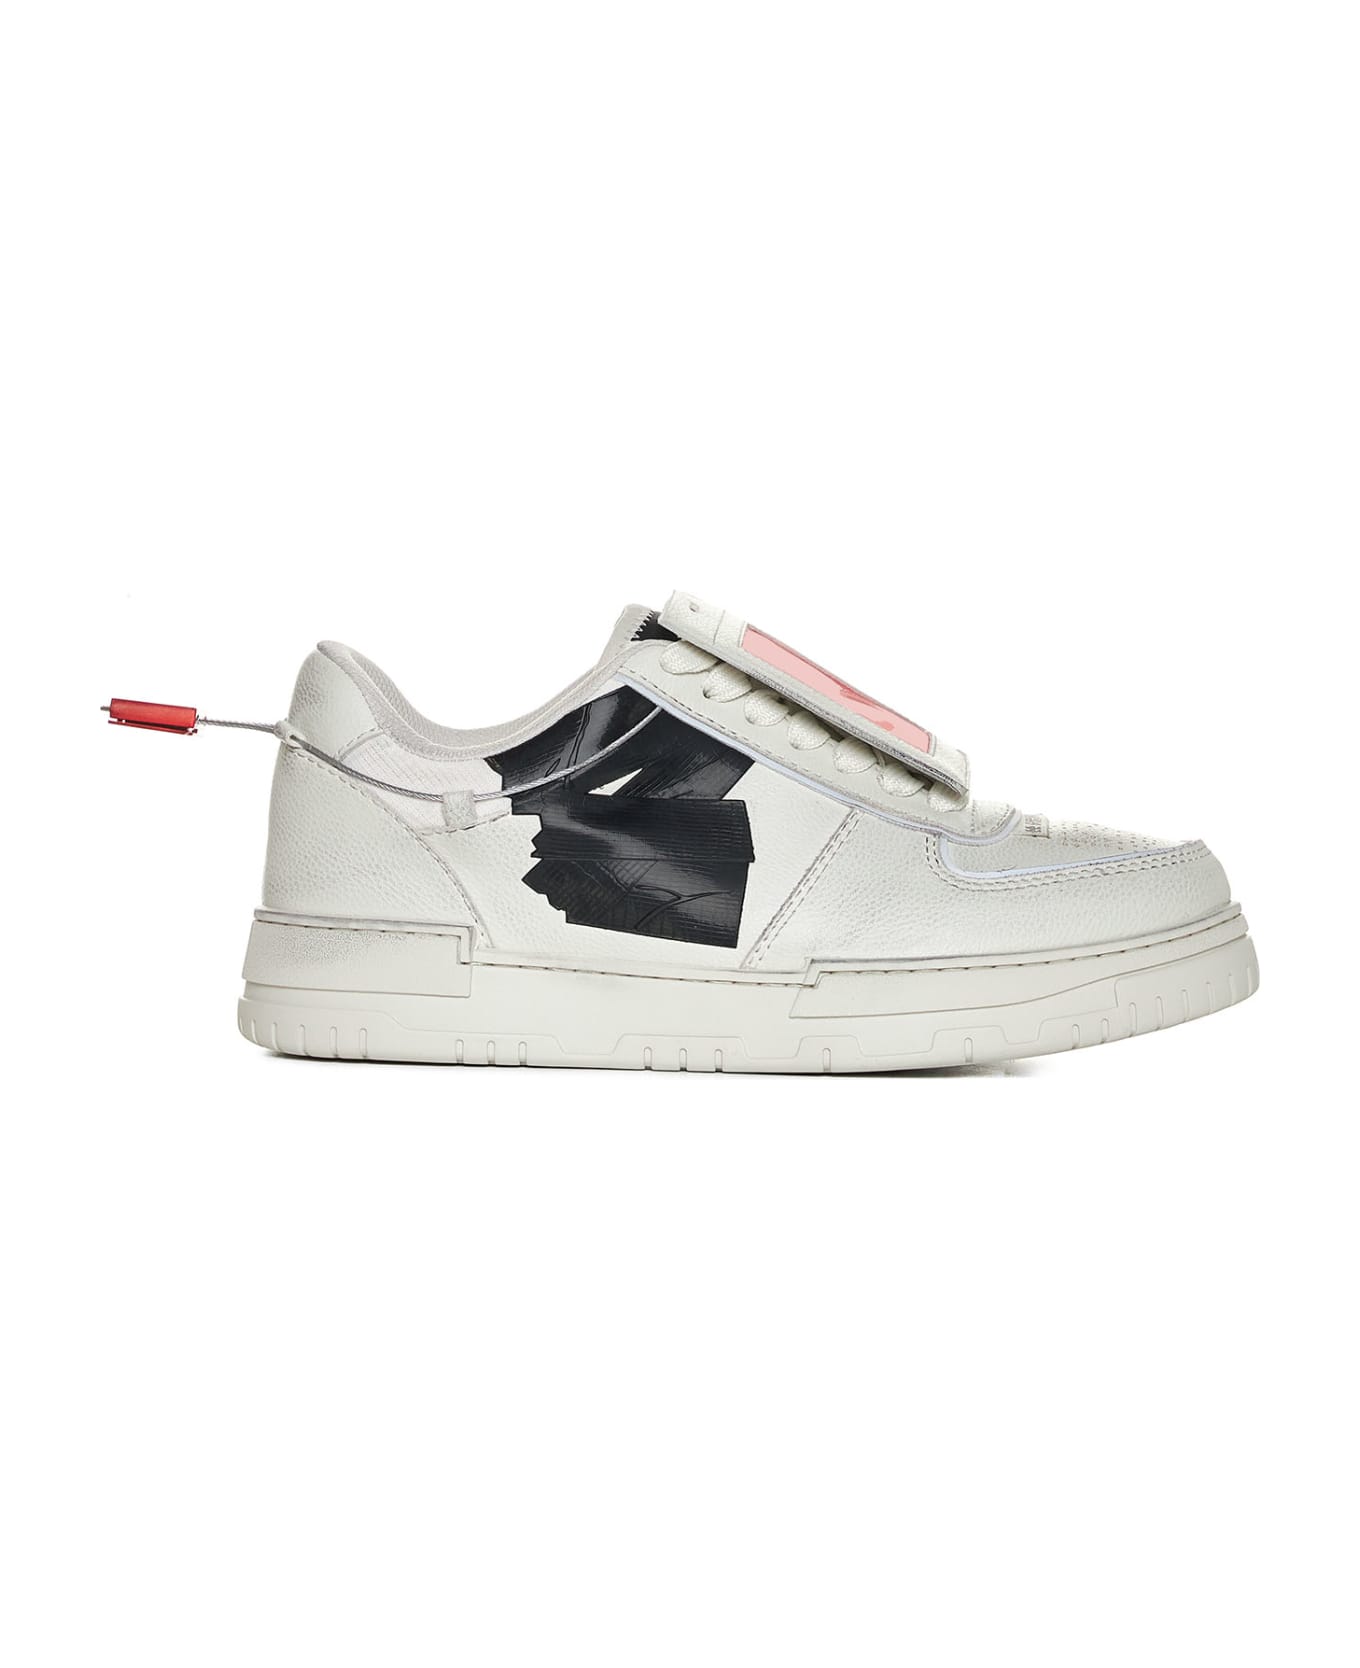 44 Label Group Sneakers - Pu blend